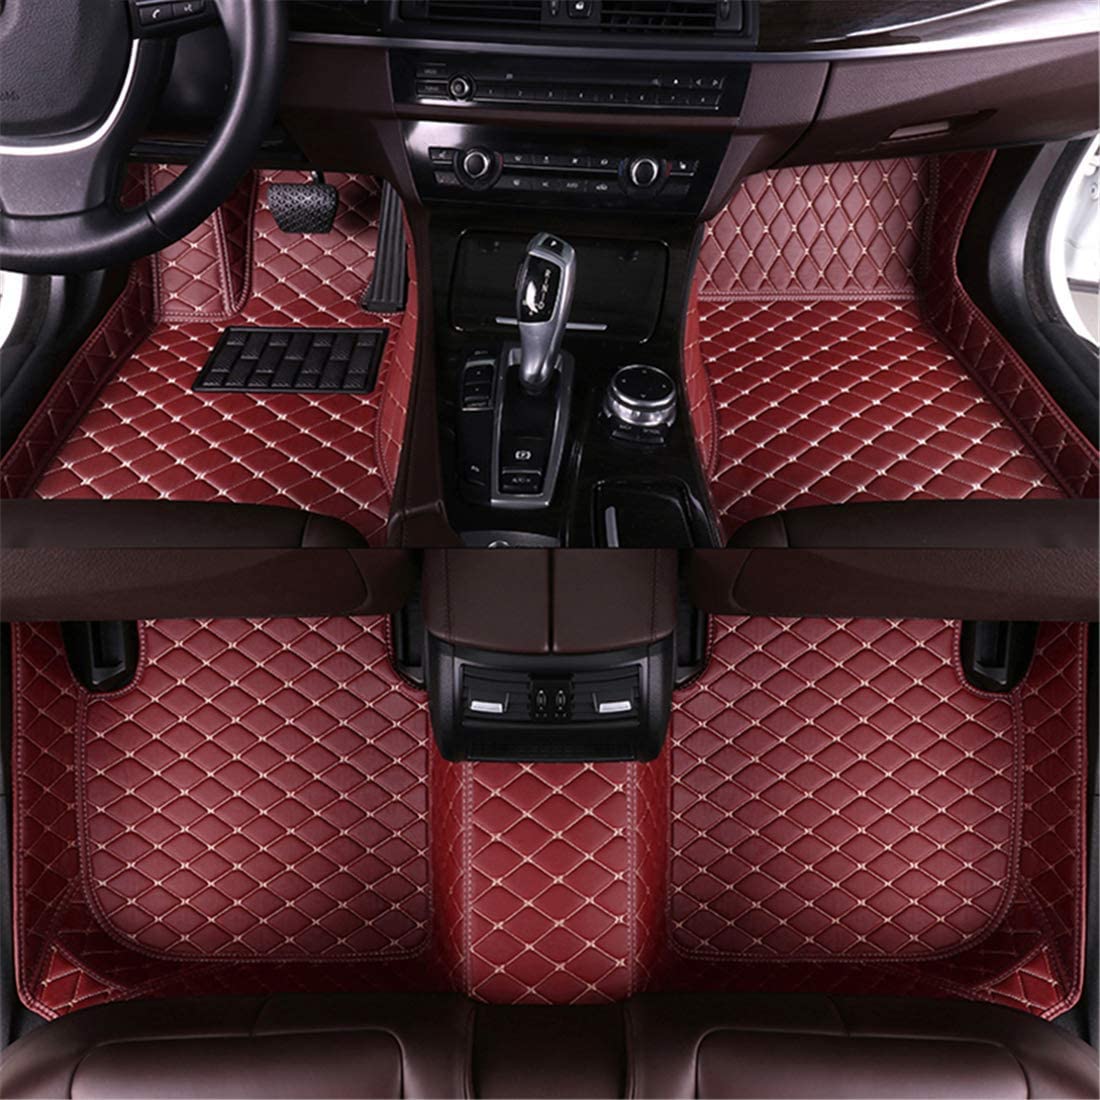 Car Floor Mats fit for Jaguar F-PACE 2016-2019 Full Coverage All Weather Protection Non-Slip Leather Floor Liners